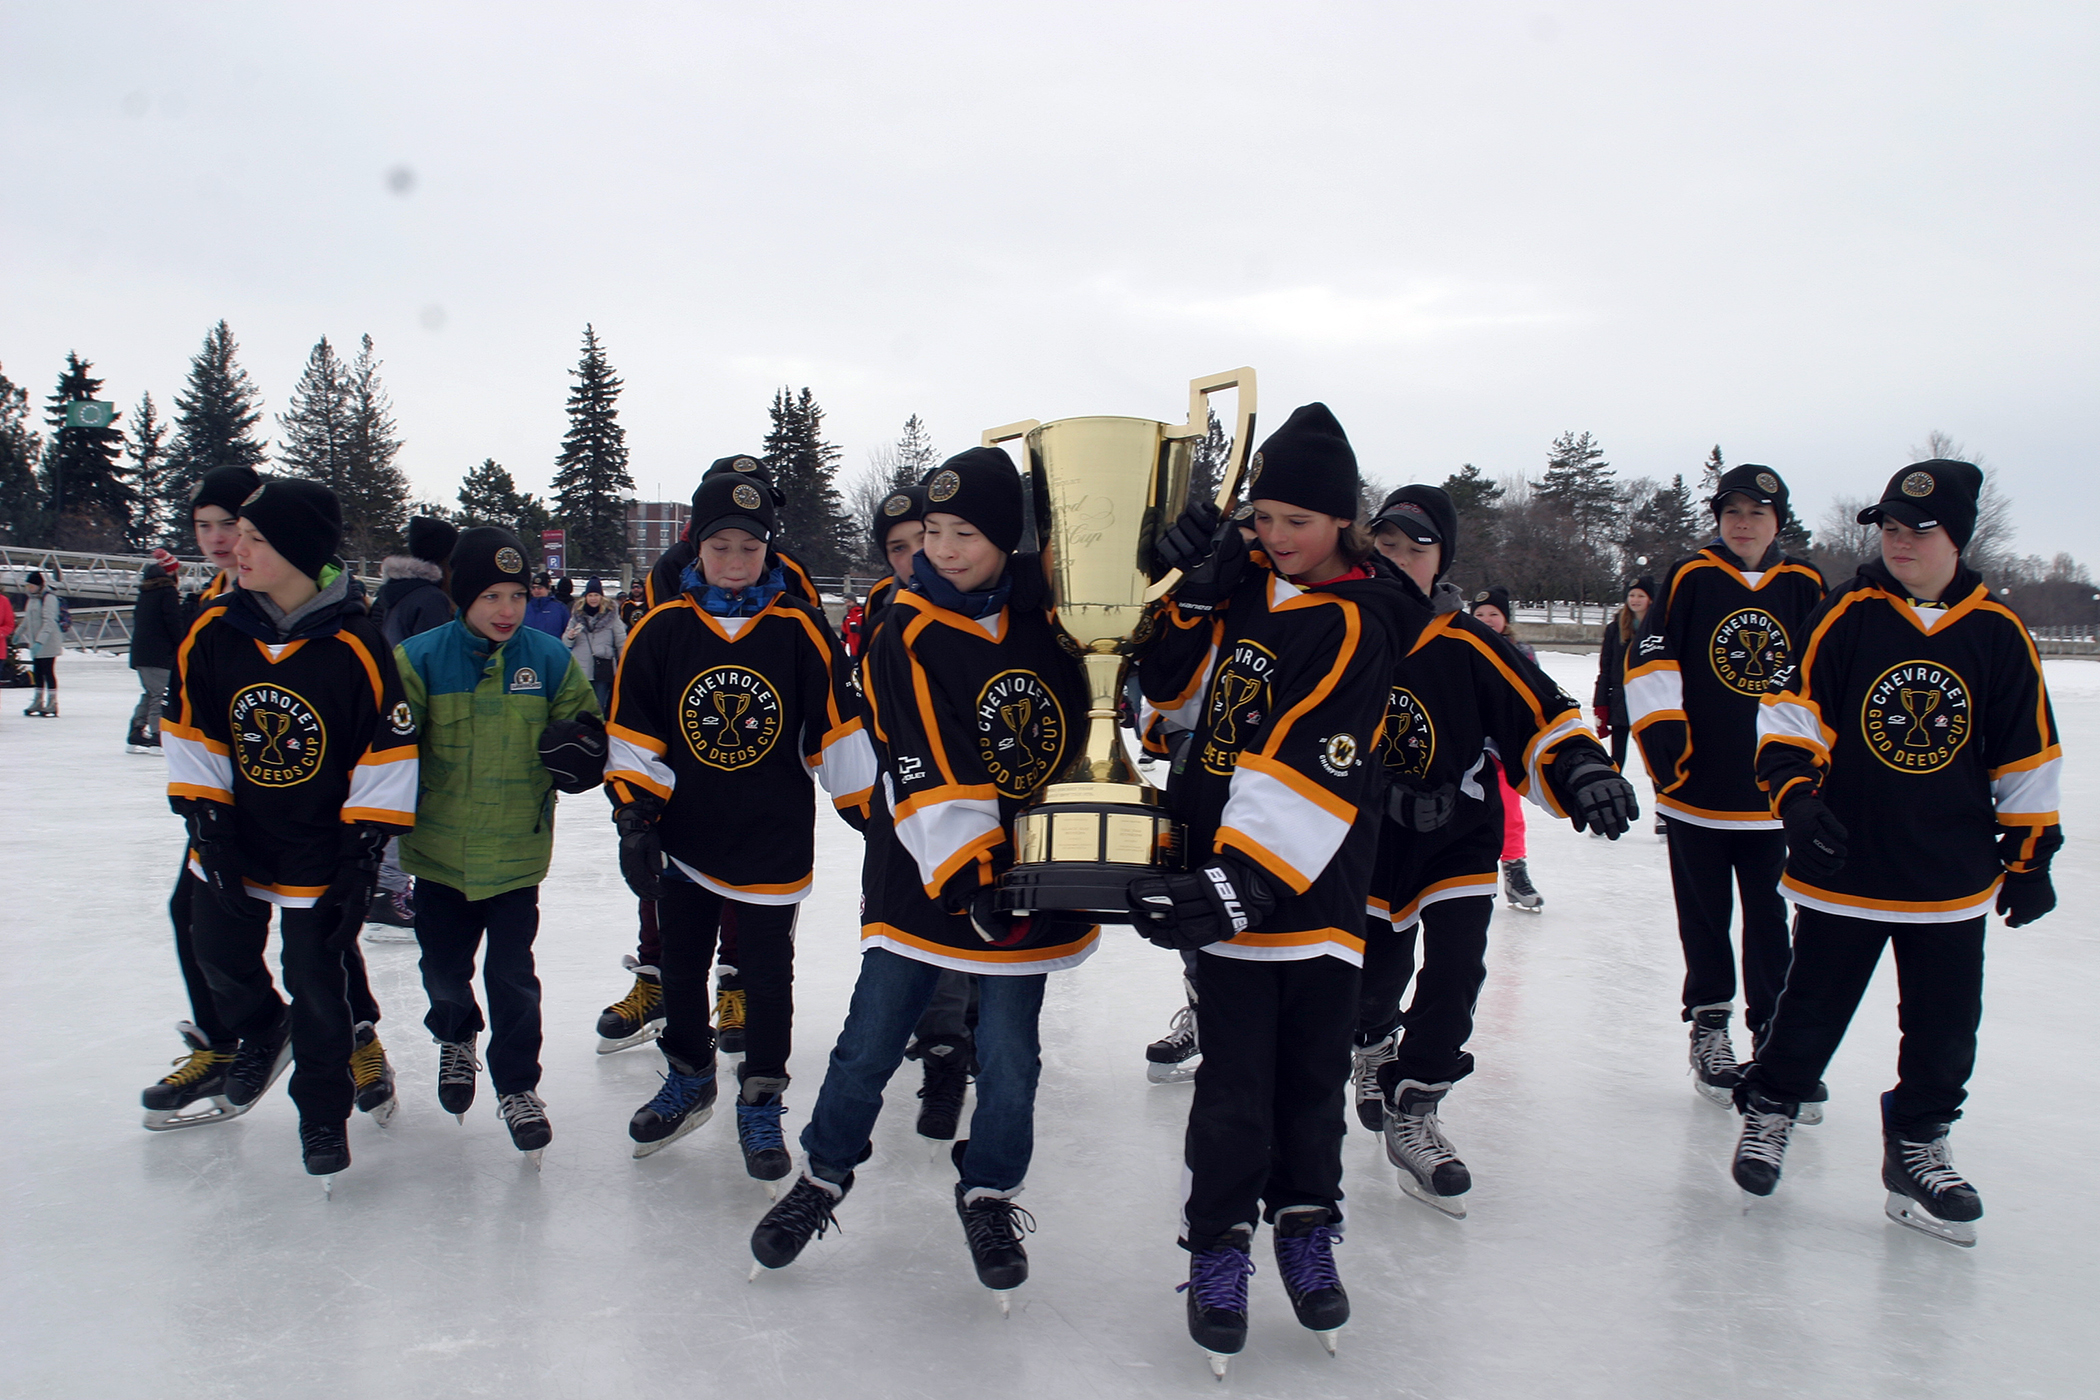 The team takes the cup for a skate. Photo by Jake Davies